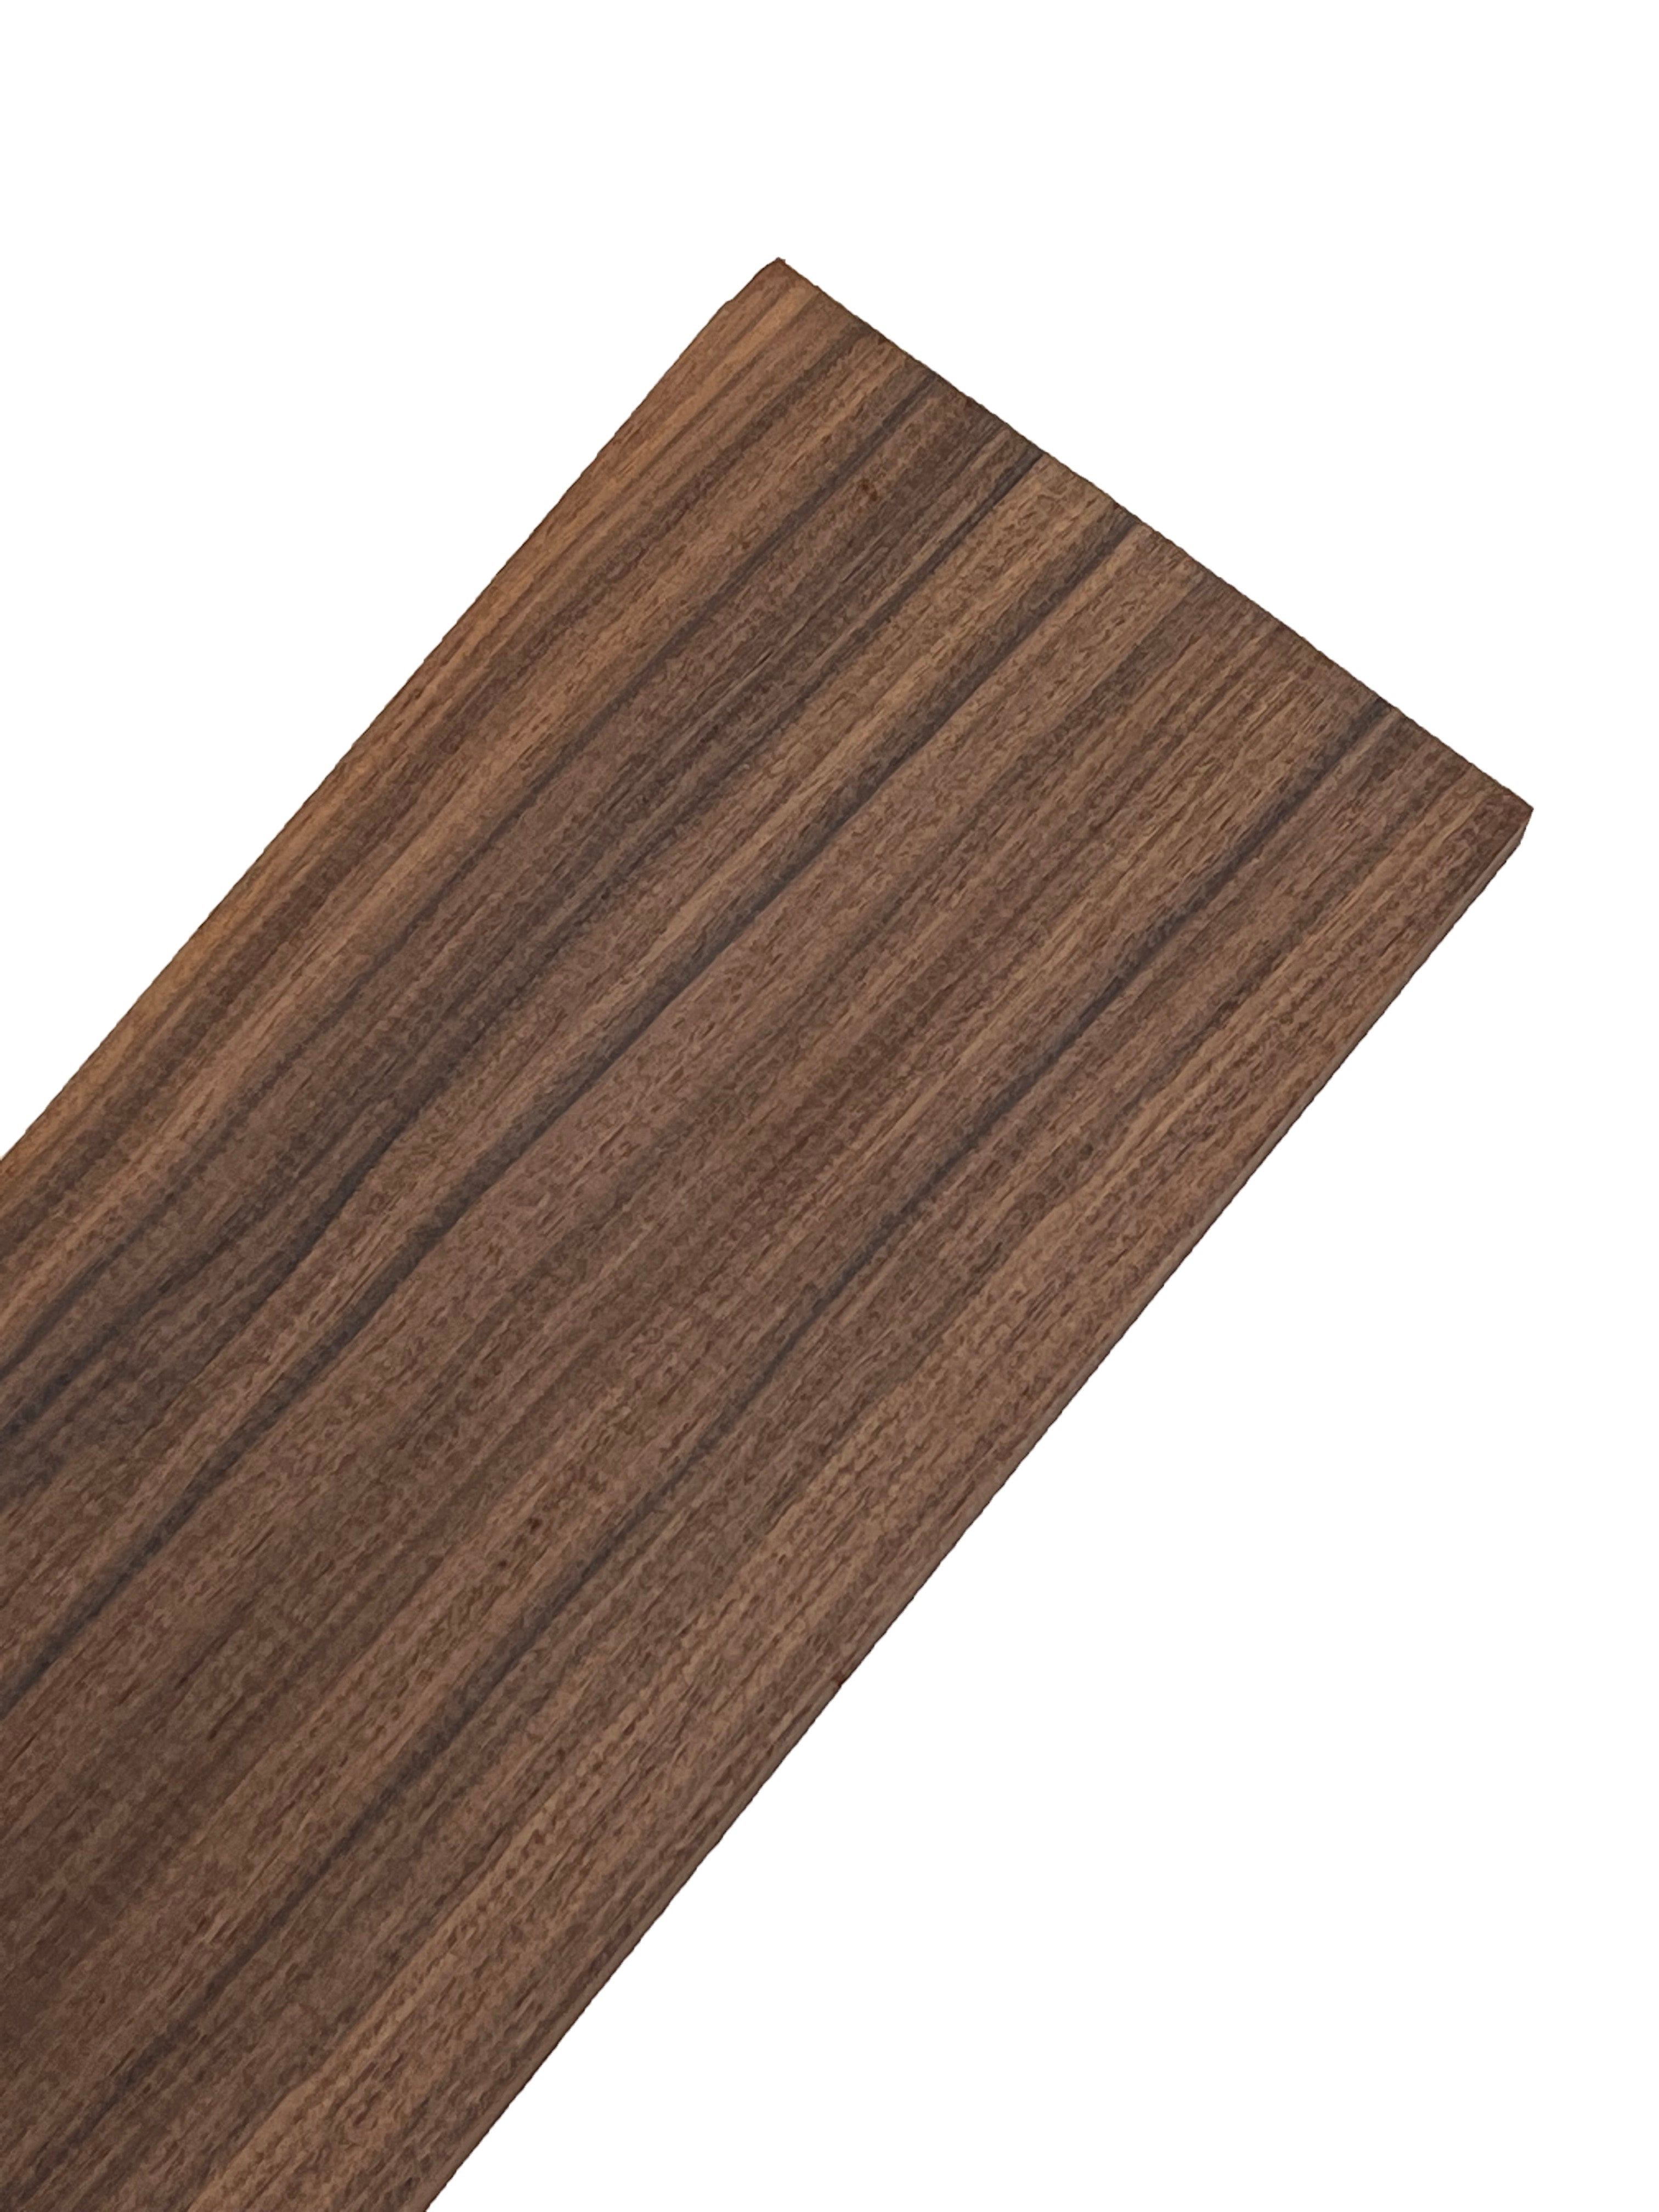 Pack of 4, Santos Rosewood Fingerboards/Fretboards Blanks 21&quot; x 2-3/4&quot; x 3/8&quot; - Exotic Wood Zone - Buy online Across USA 